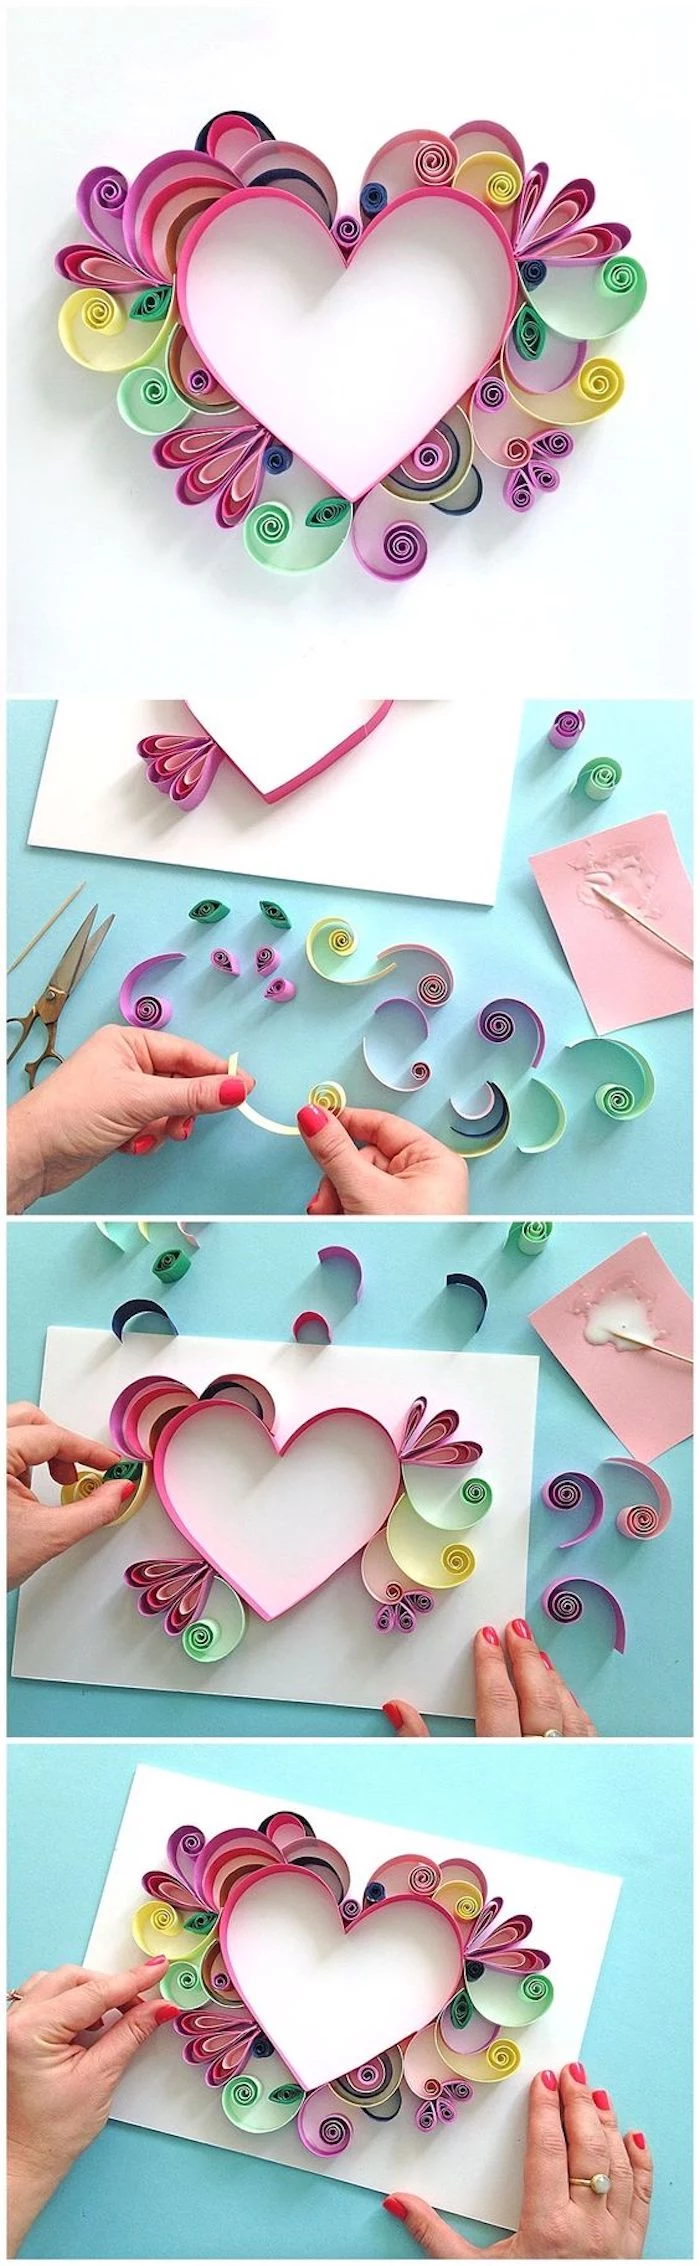 paper quilling, colourful heart, made of paper, easy crafts for toddlers, step by step, diy tutorial